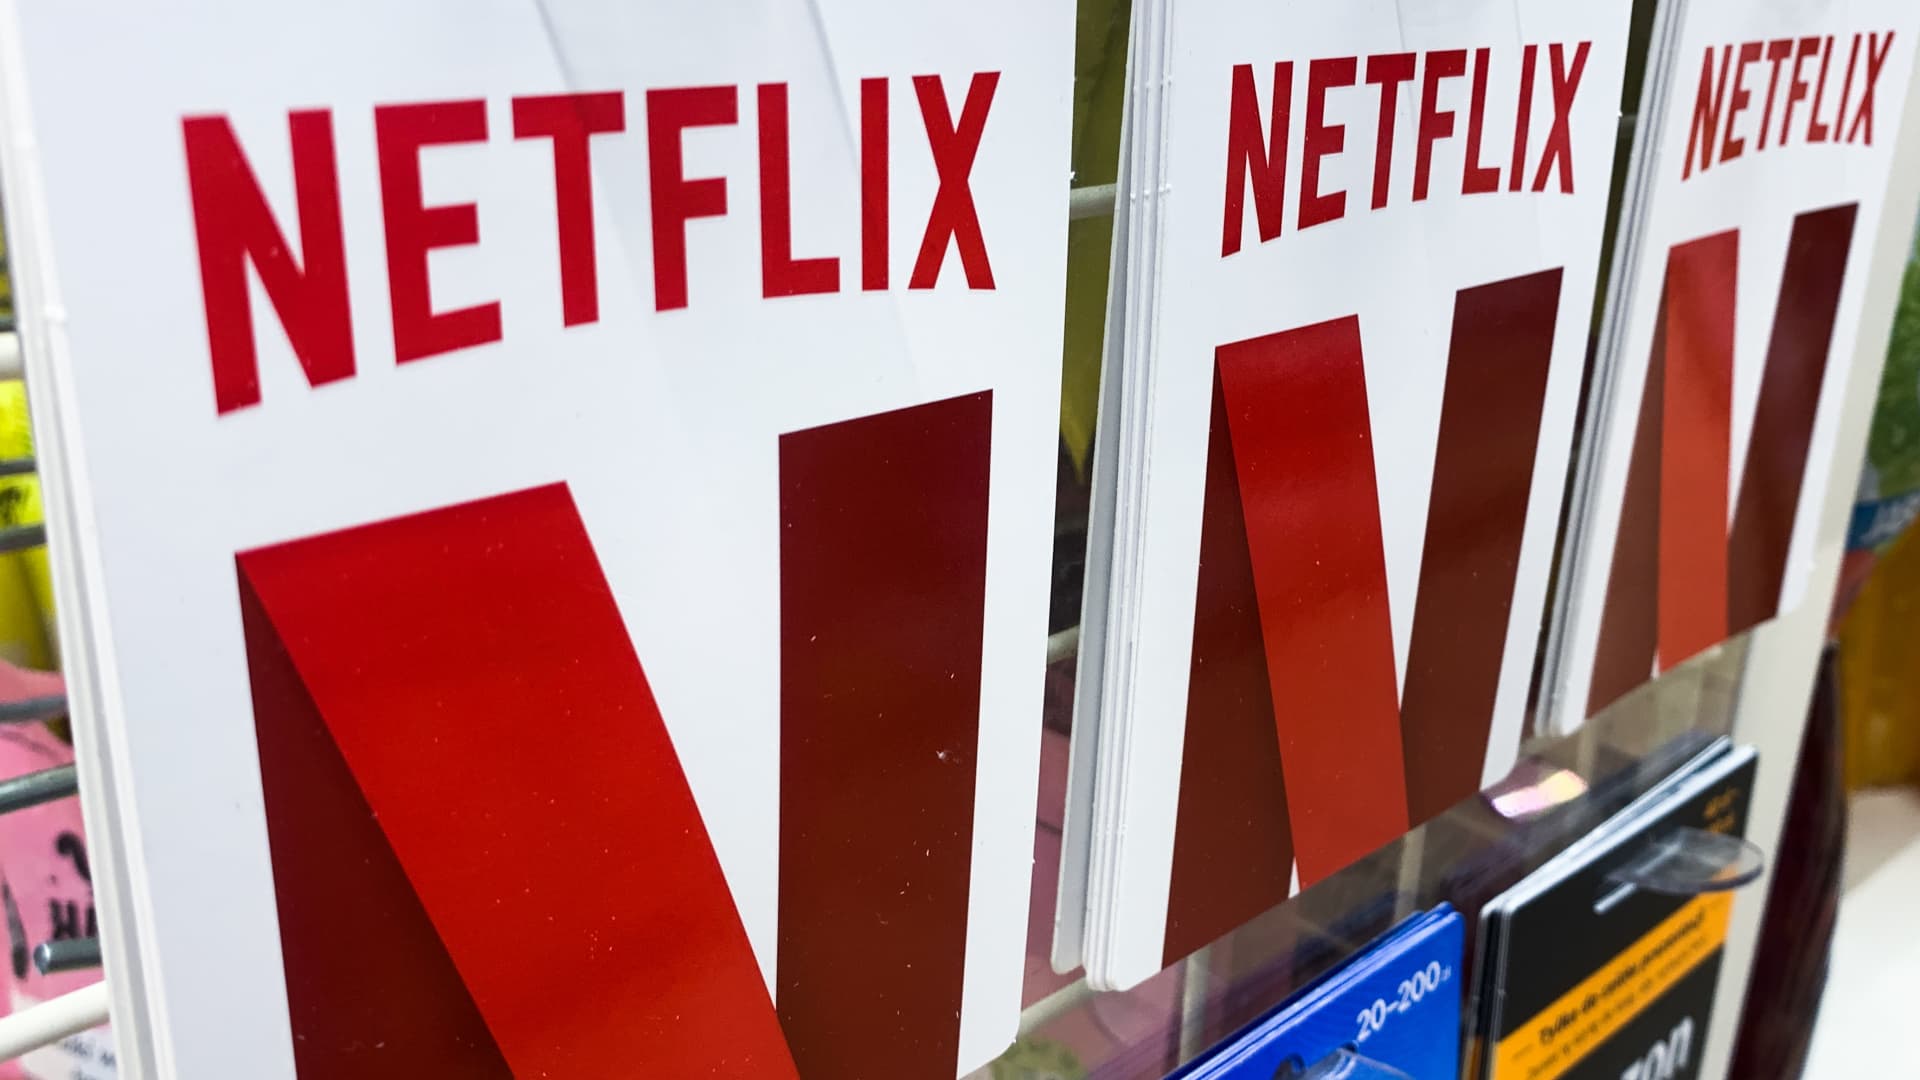 Netflix loses fewer subscribers than expected and says cheaper ad tier is coming in early 2023